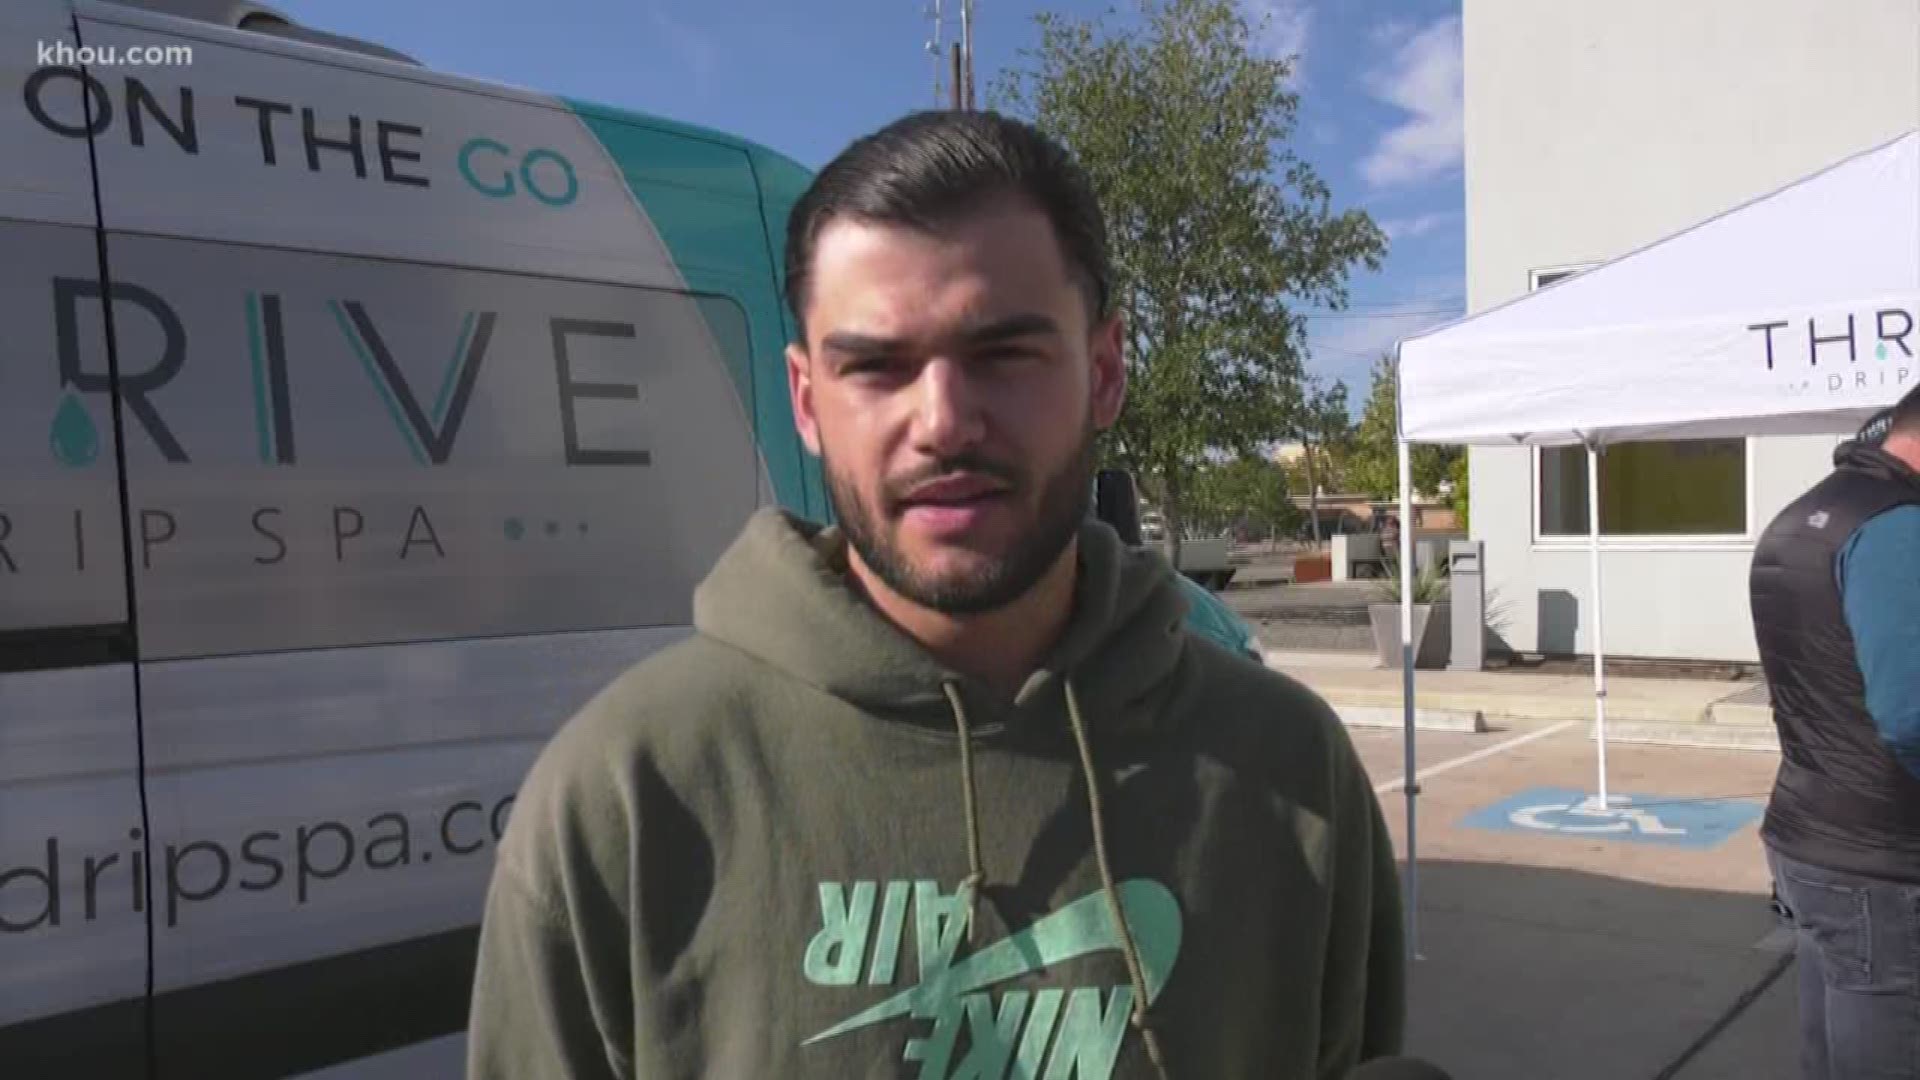 Houston Astros pitcher lance McCullers hit a home run with his turkey giveaway at the Big Brothers Big Sisters headquarters in Houston.